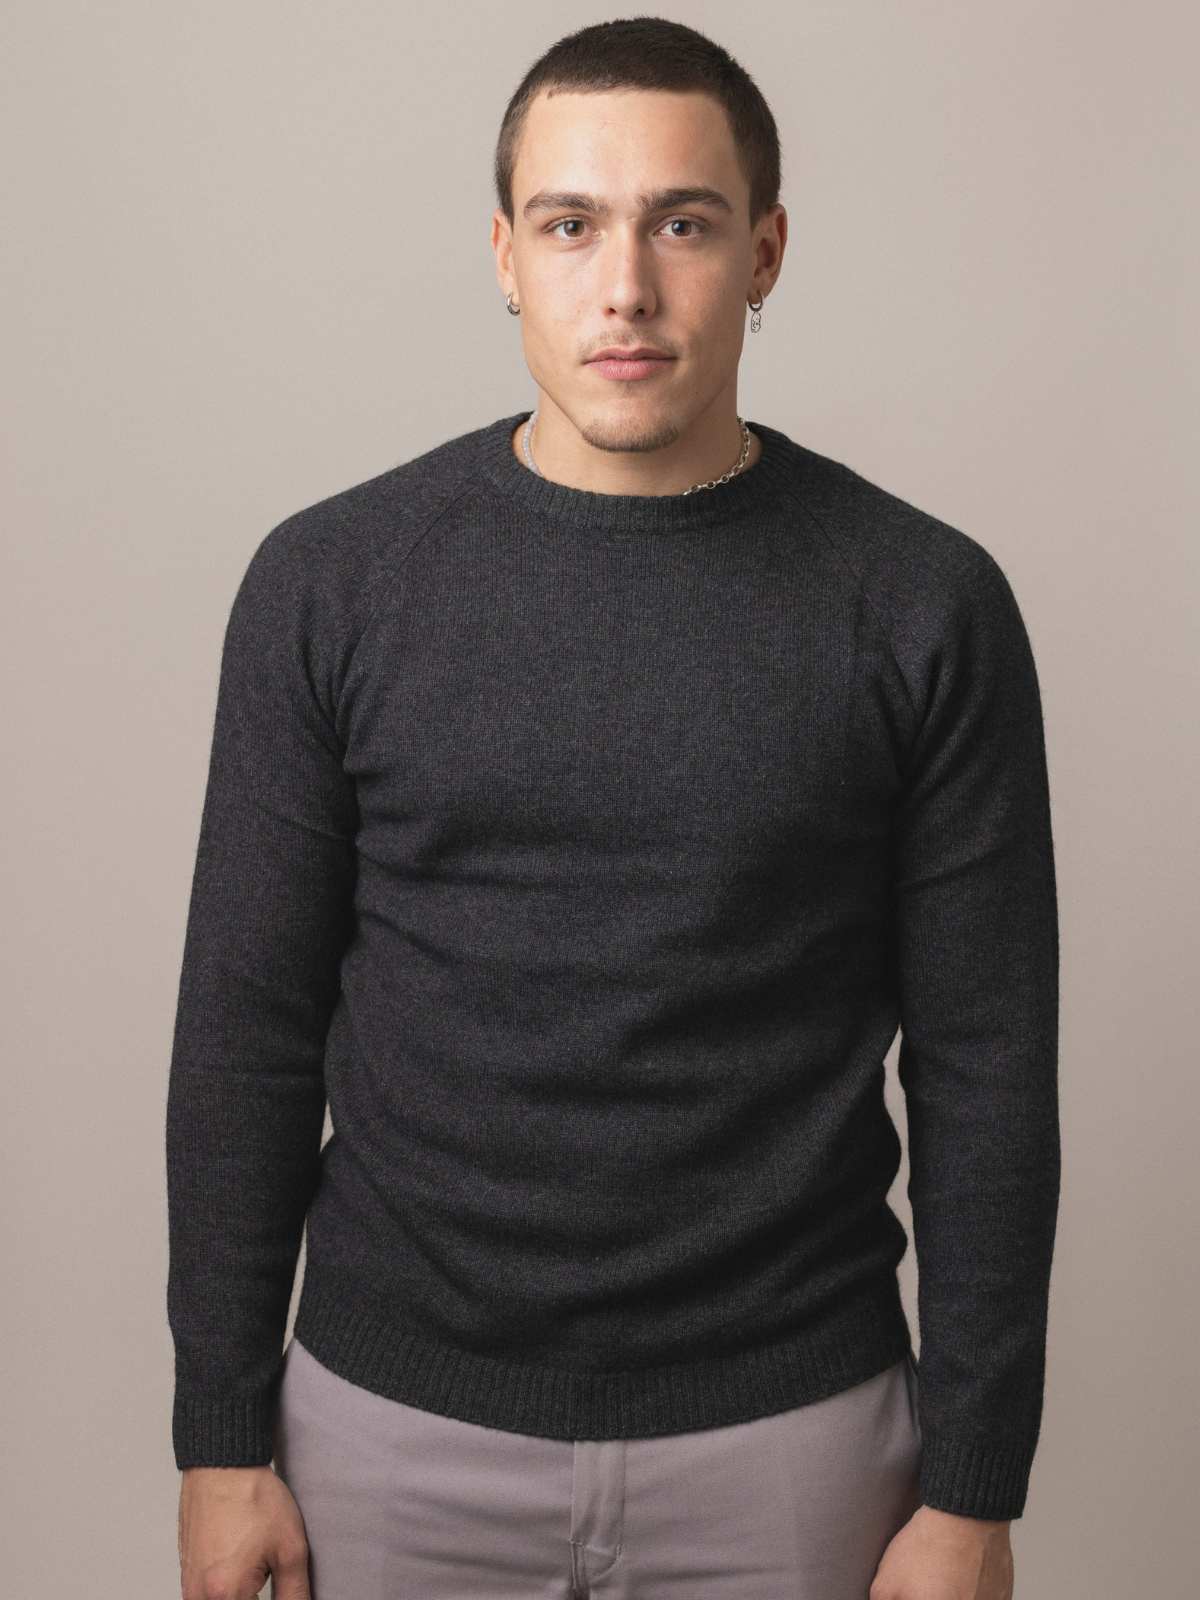 Visitor_Clothing_Men_Wool_Yak_Cashmere_Sweater_Charcoal